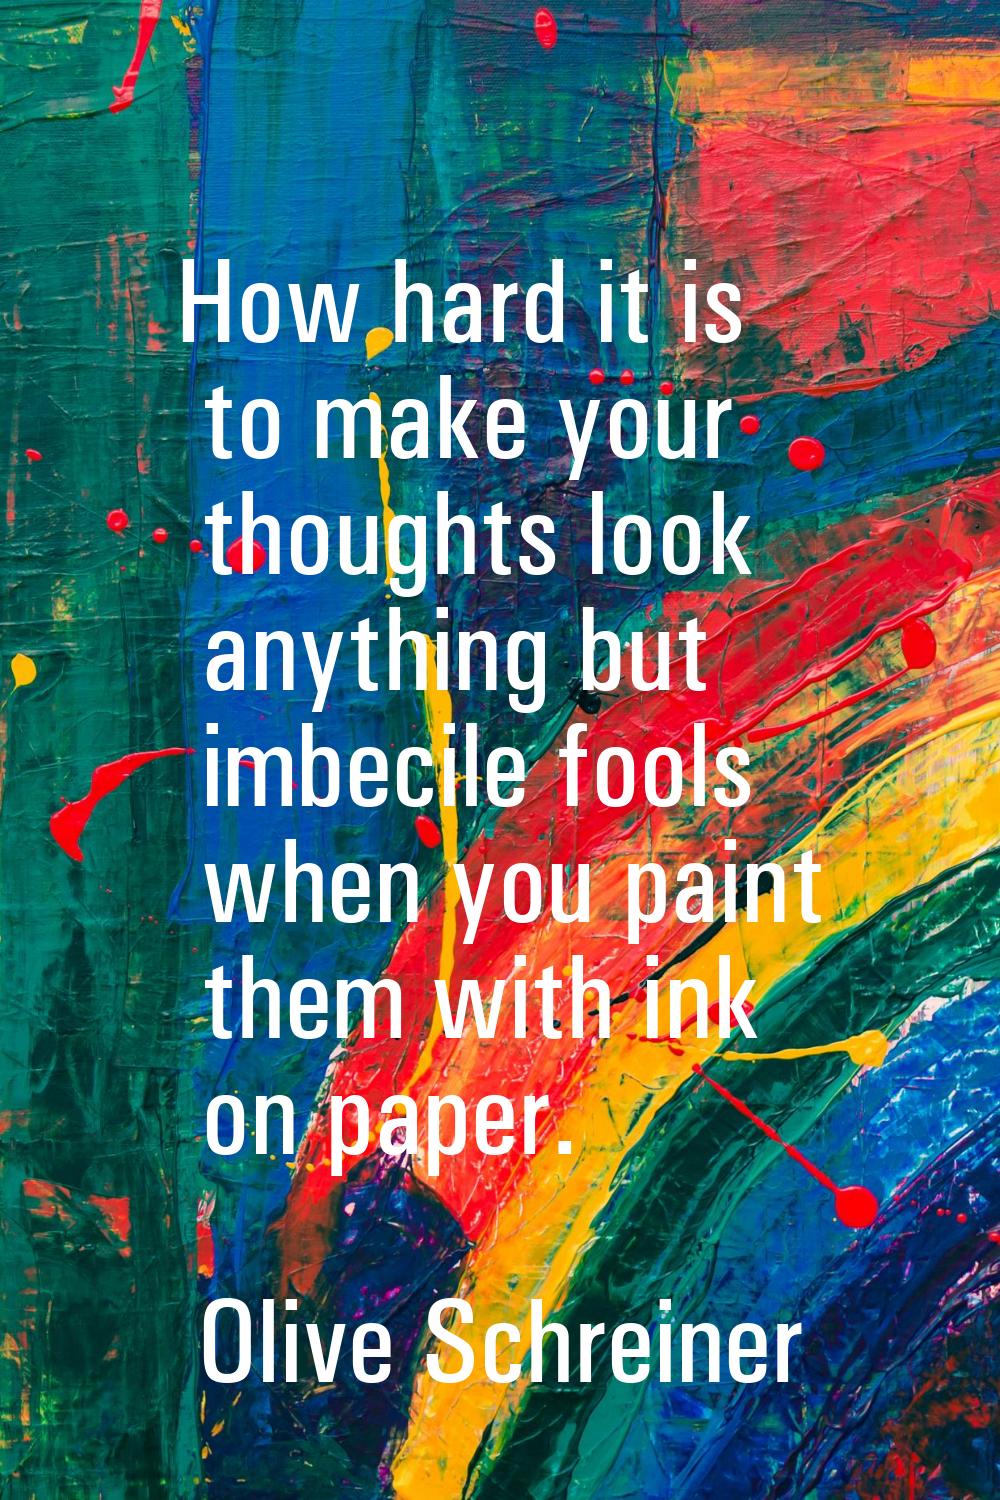 How hard it is to make your thoughts look anything but imbecile fools when you paint them with ink 